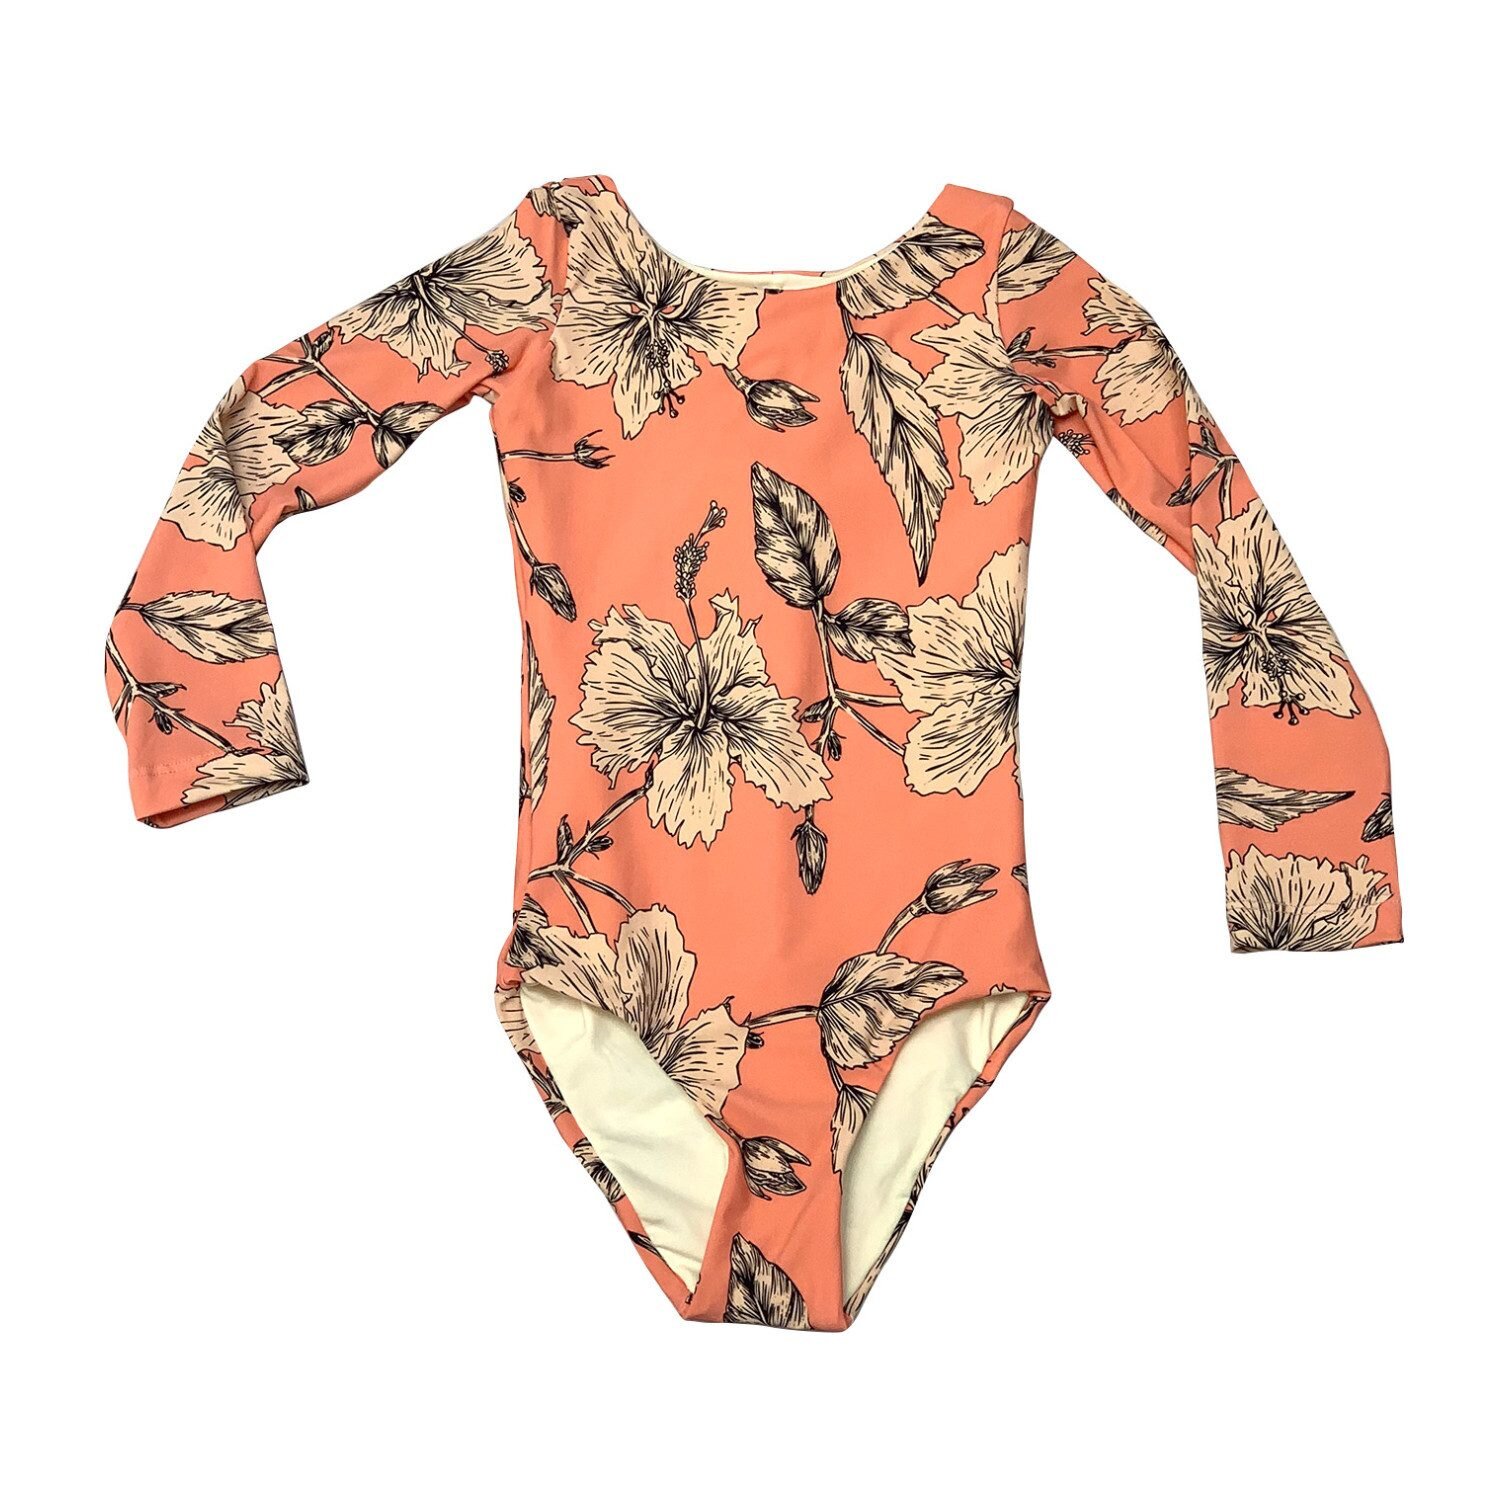 42 Adorable Kids Long Sleeve Bathing Suits — The Overwhelmed Mommy Blog